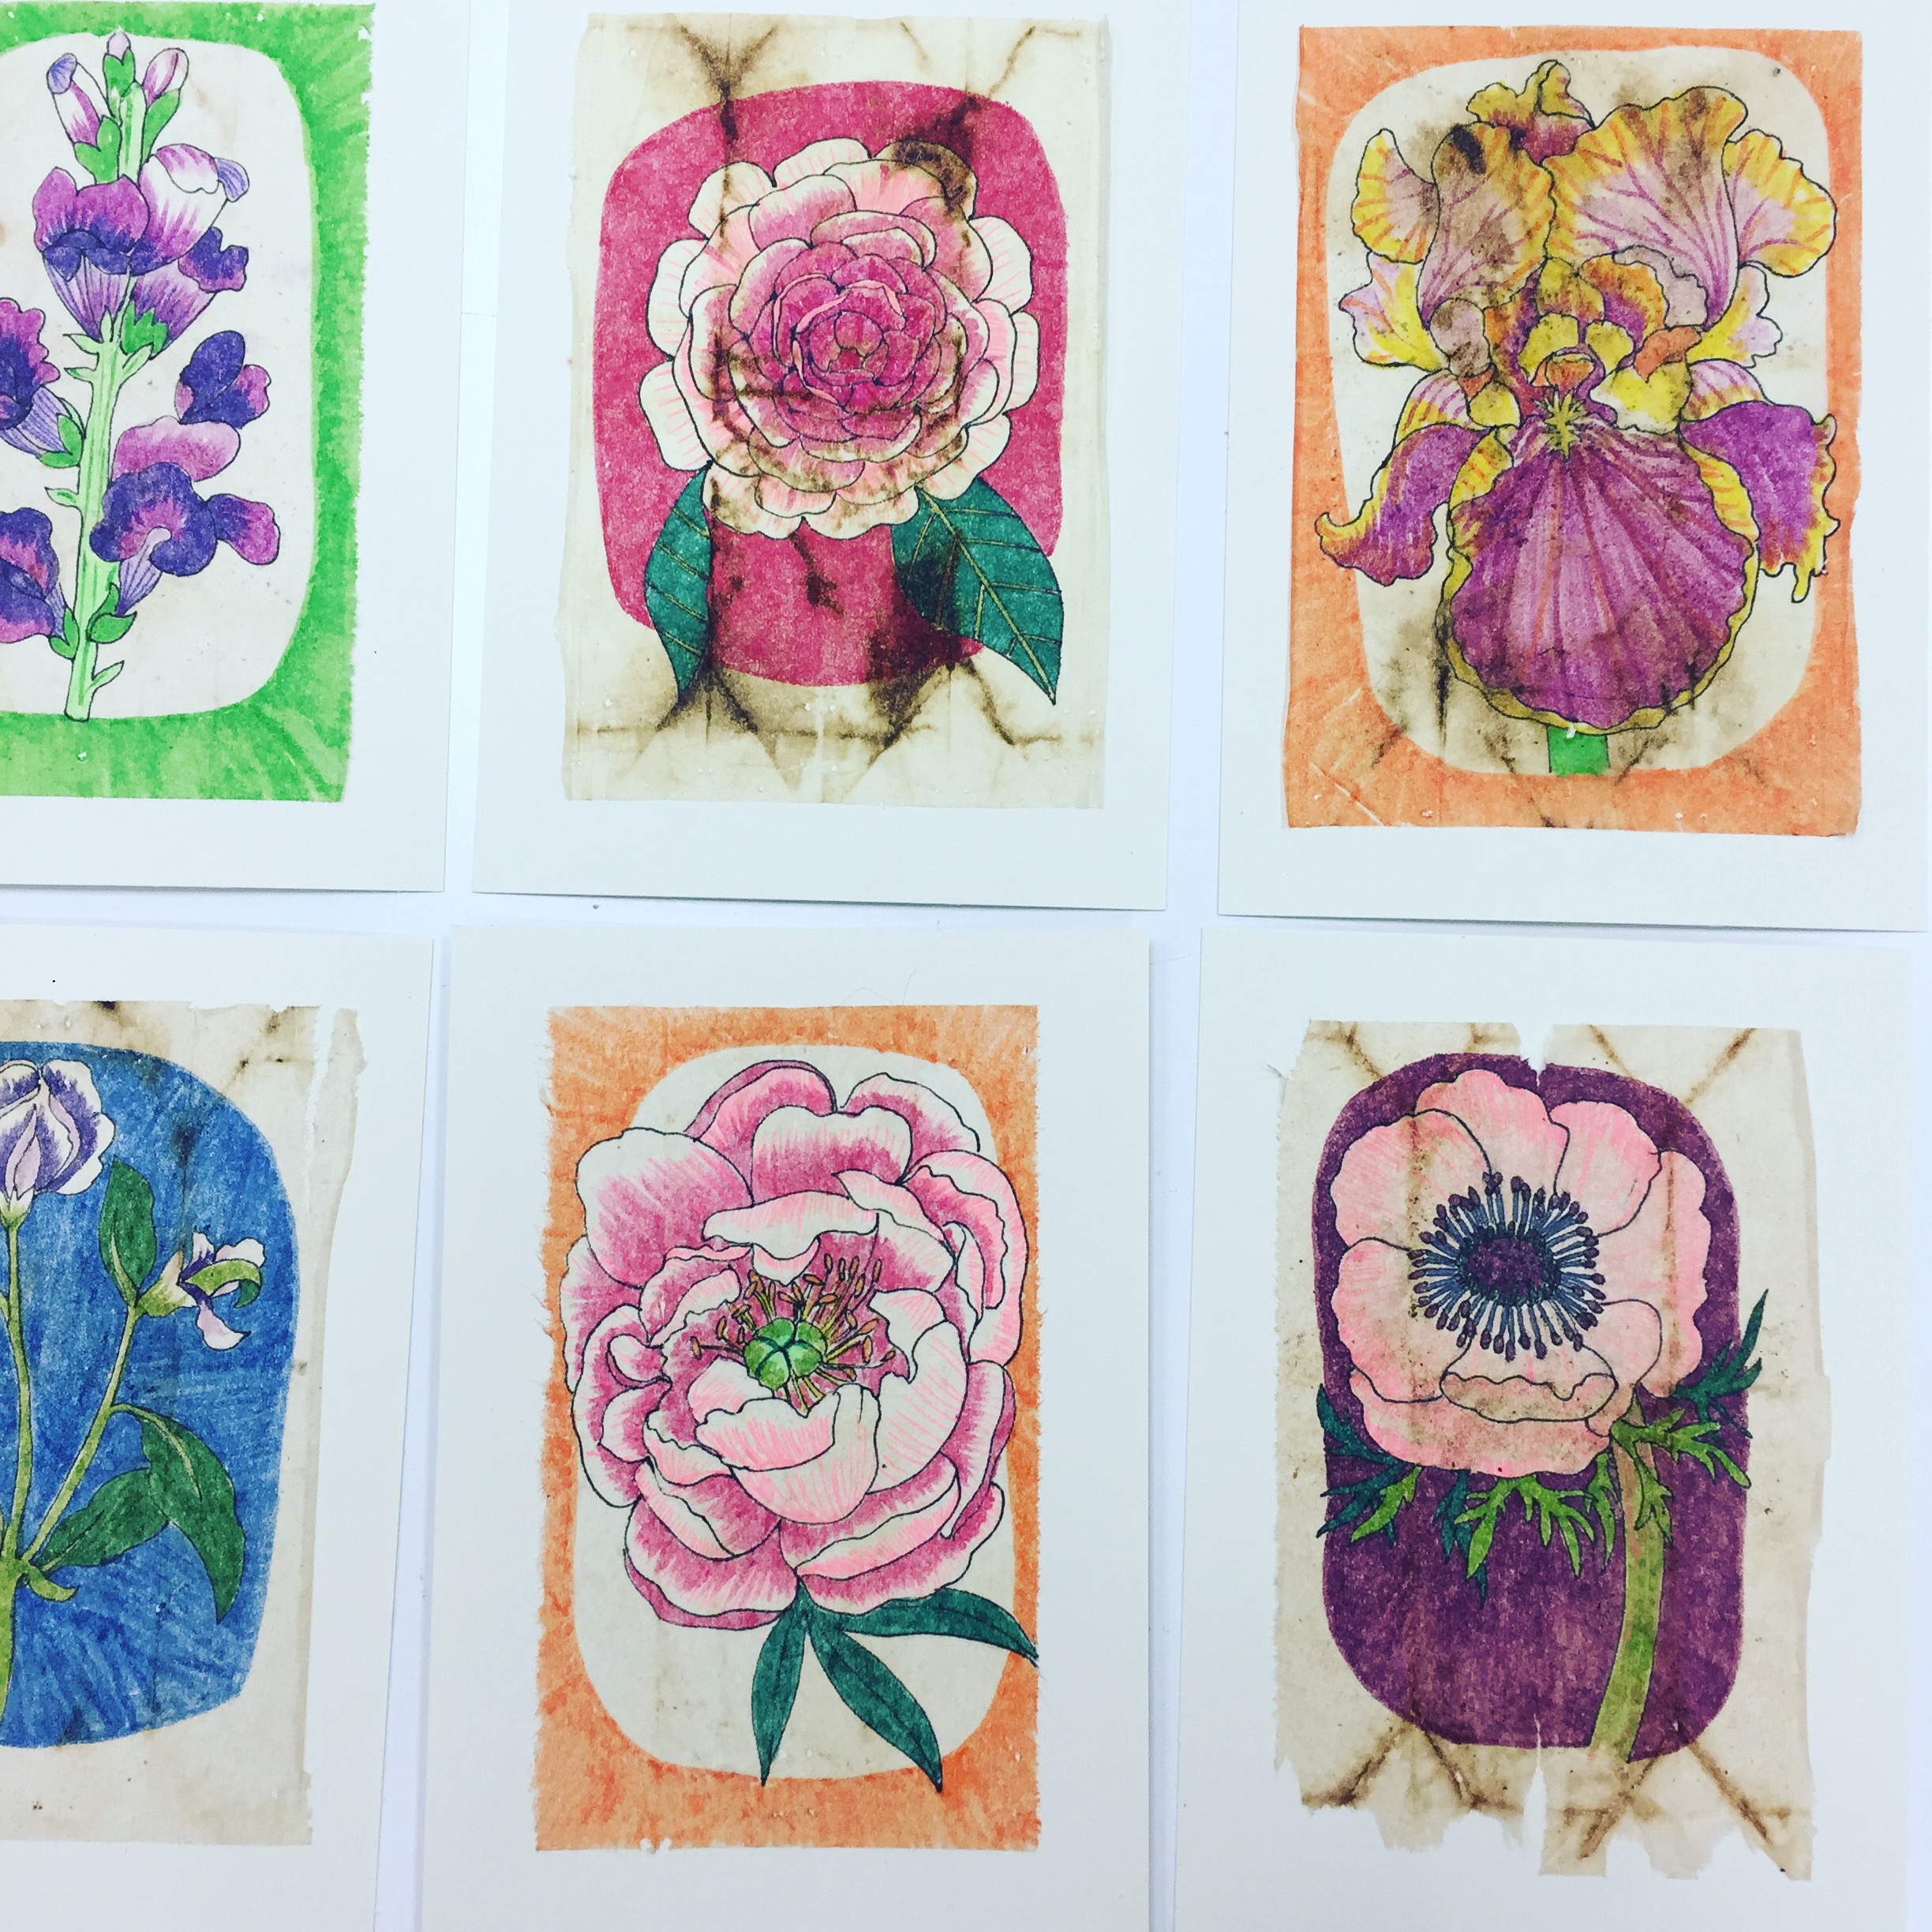 Plant Portraits (pen and marker on recycled tea bags)